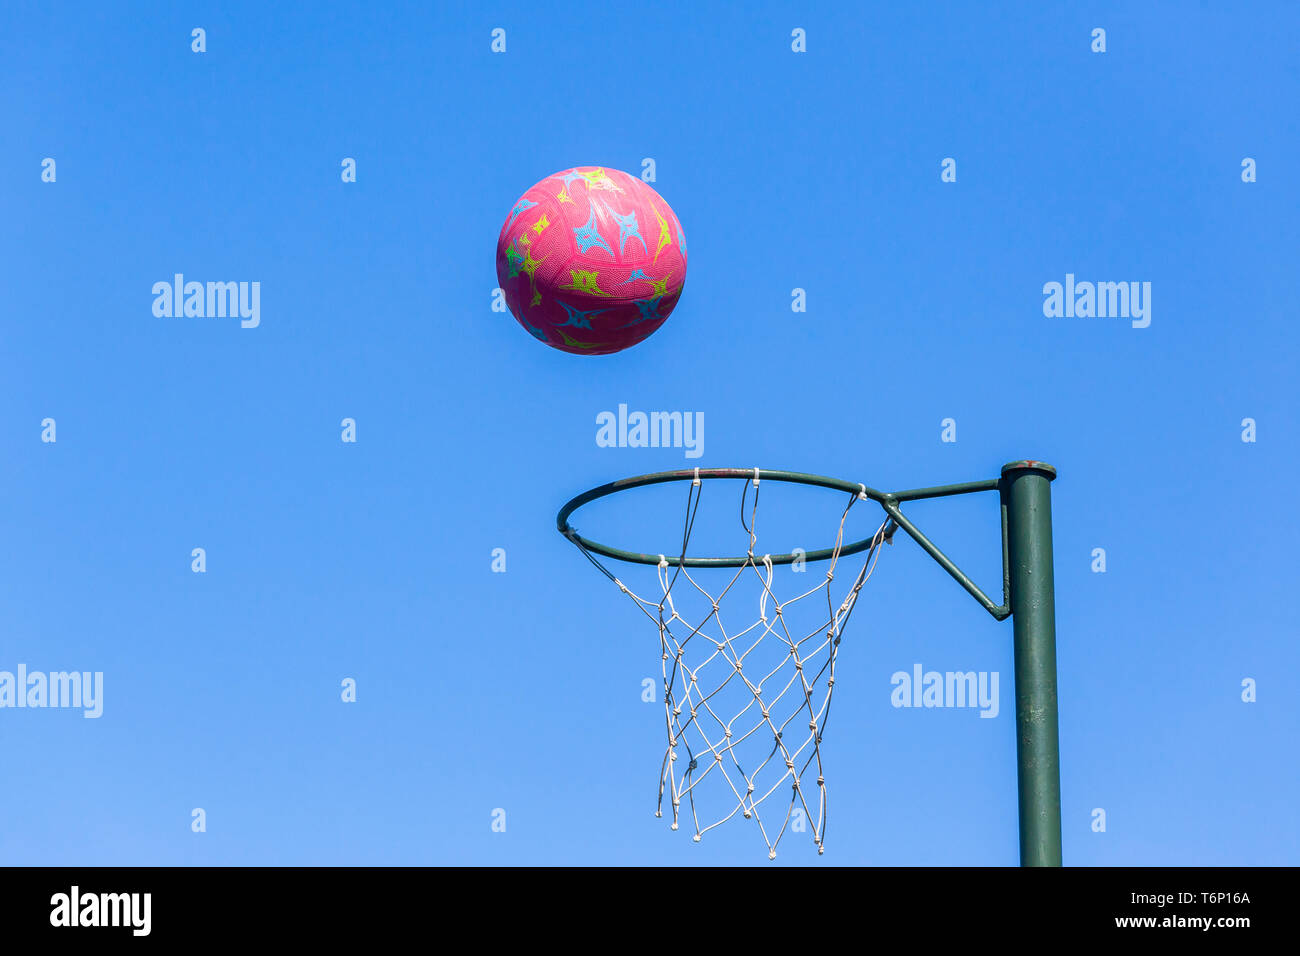 Netball hoop net with red ball in flight against  blue sky . Stock Photo